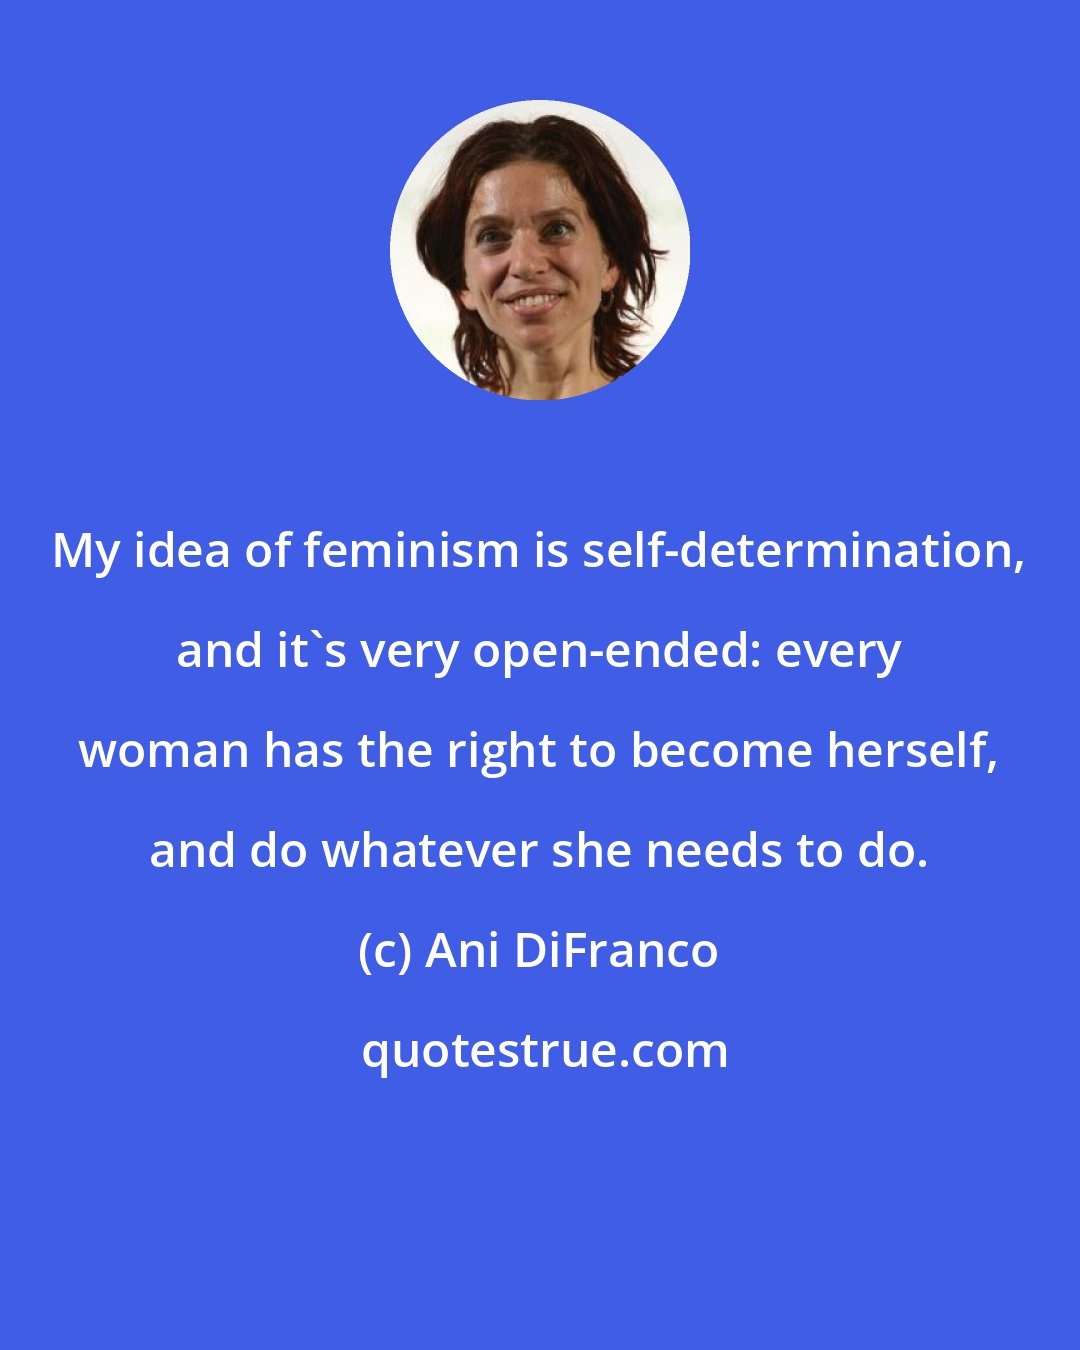 Ani DiFranco: My idea of feminism is self-determination, and it's very open-ended: every woman has the right to become herself, and do whatever she needs to do.